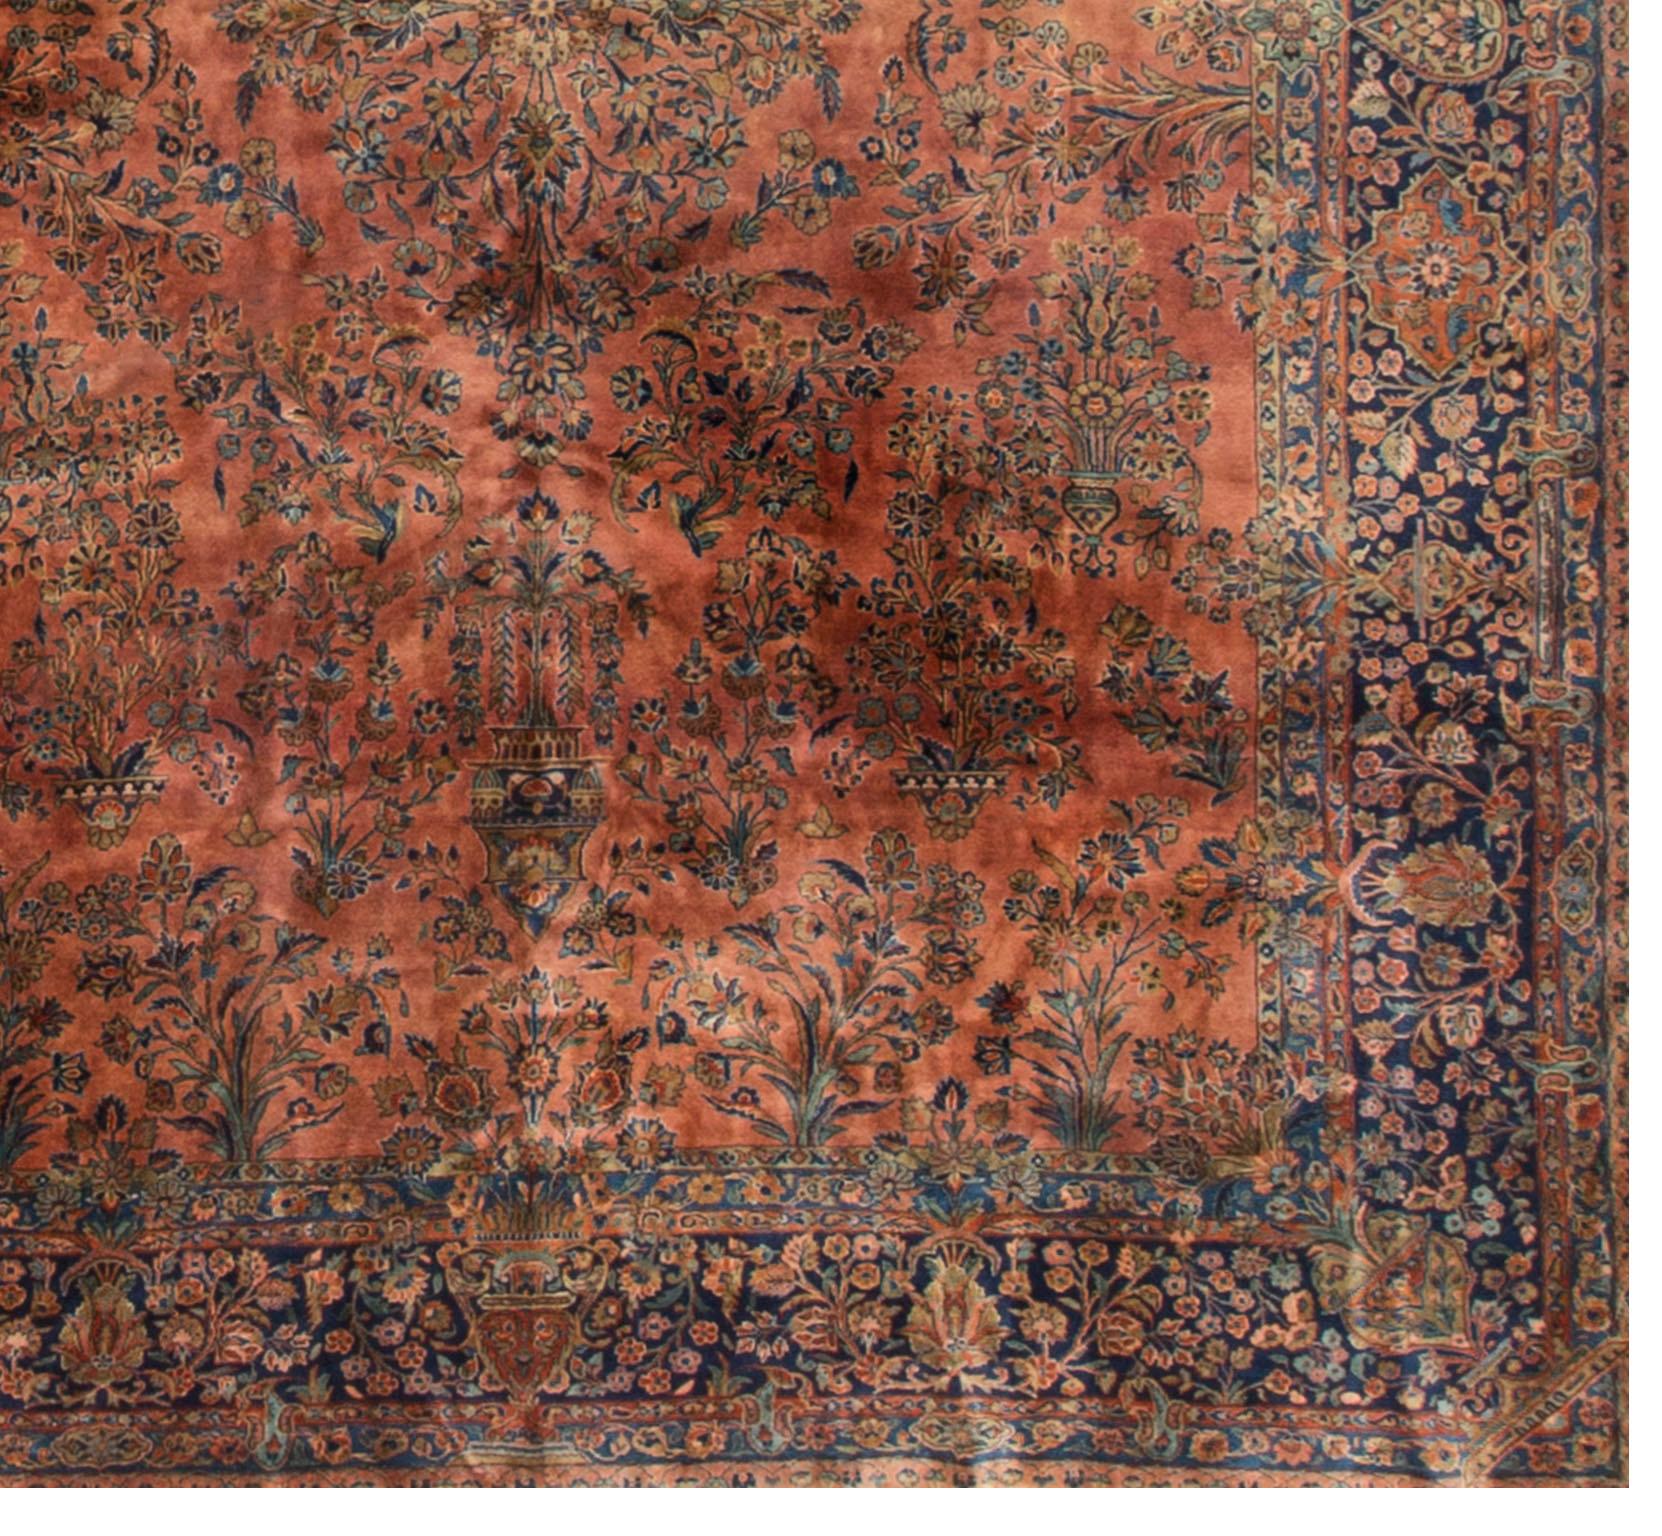 Persian Manchester Kashan rug carpet, circa 1900, measures: 8'8 x 11'10. Situated on the caravan route to India in central Persia is the town of Kashan famed as one of the top-quality rug production areas. They have been producing and exporting